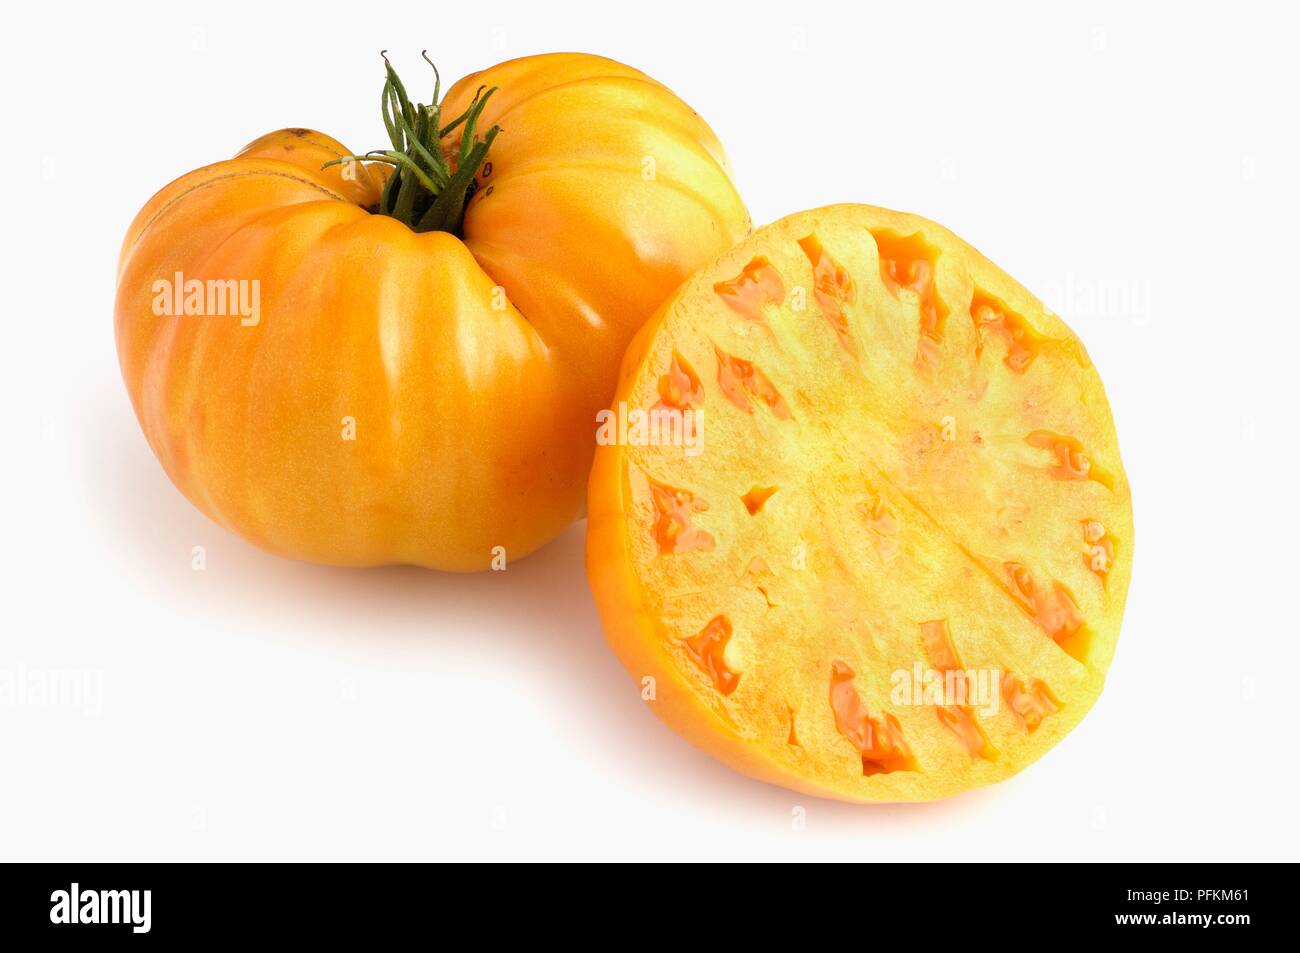 Whole and sliced American Yellow Oxheart tomato Stock Photo